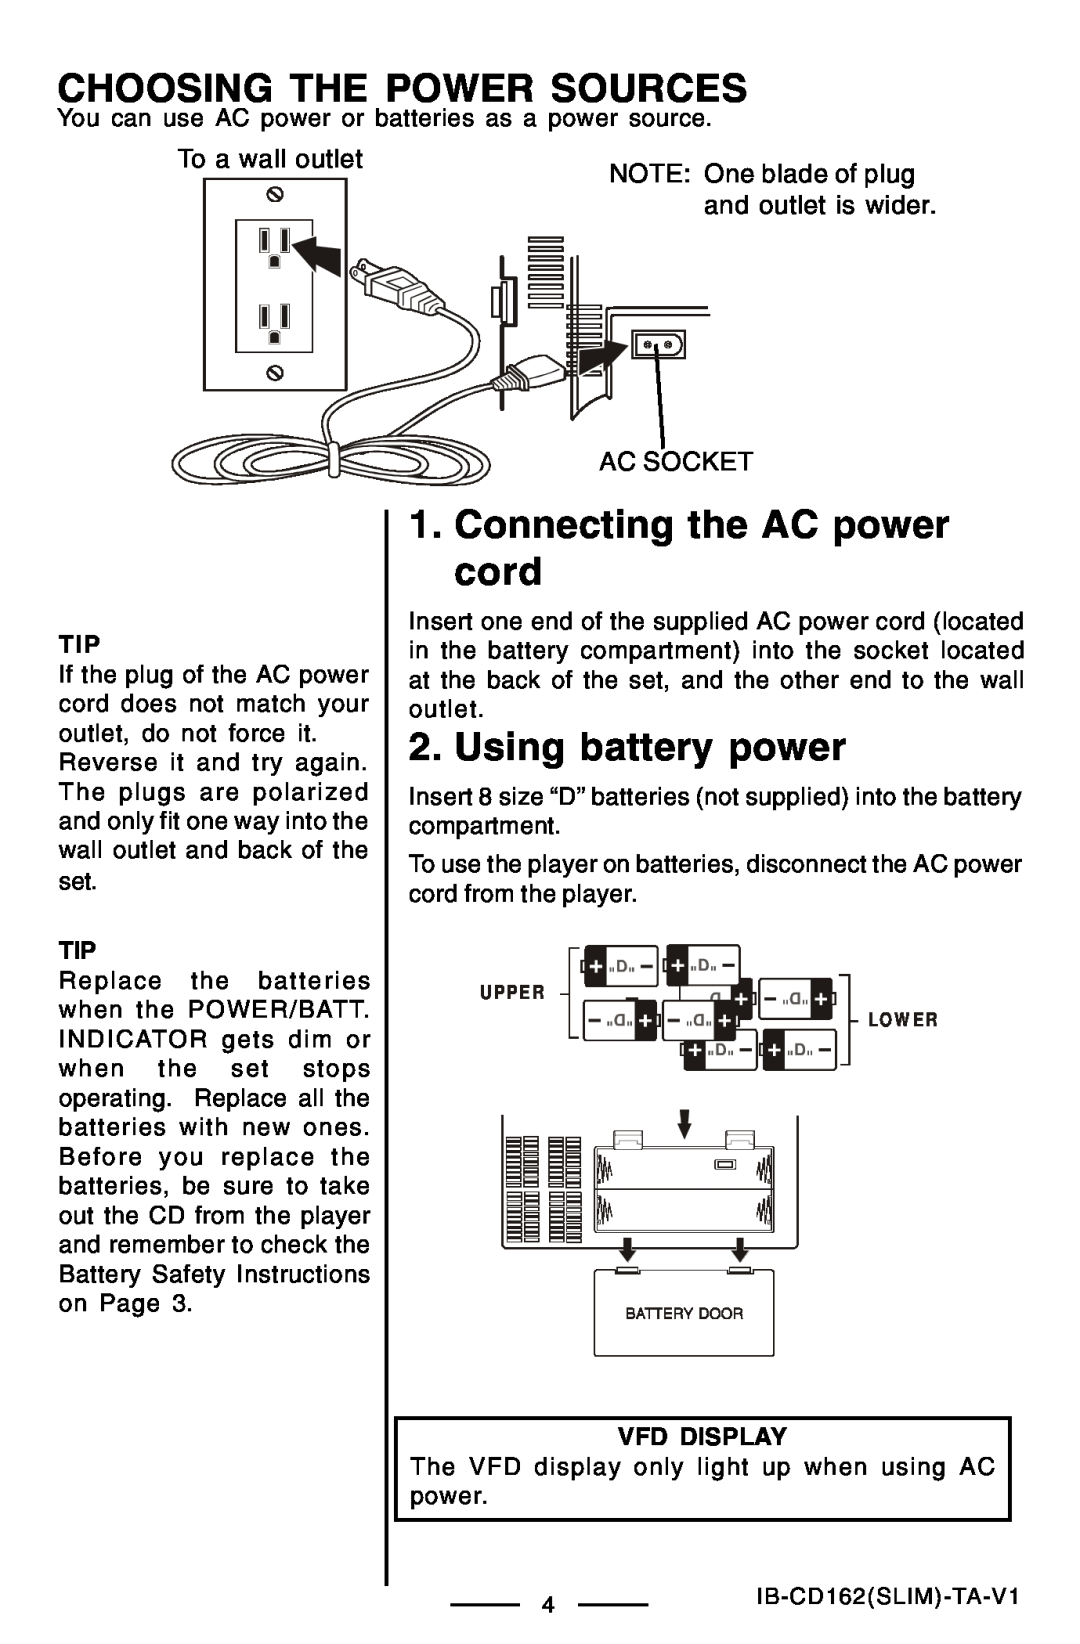 Lenoxx Electronics CD-162 Choosing The Power Sources, Connecting the AC power cord, Using battery power, To a wall outlet 